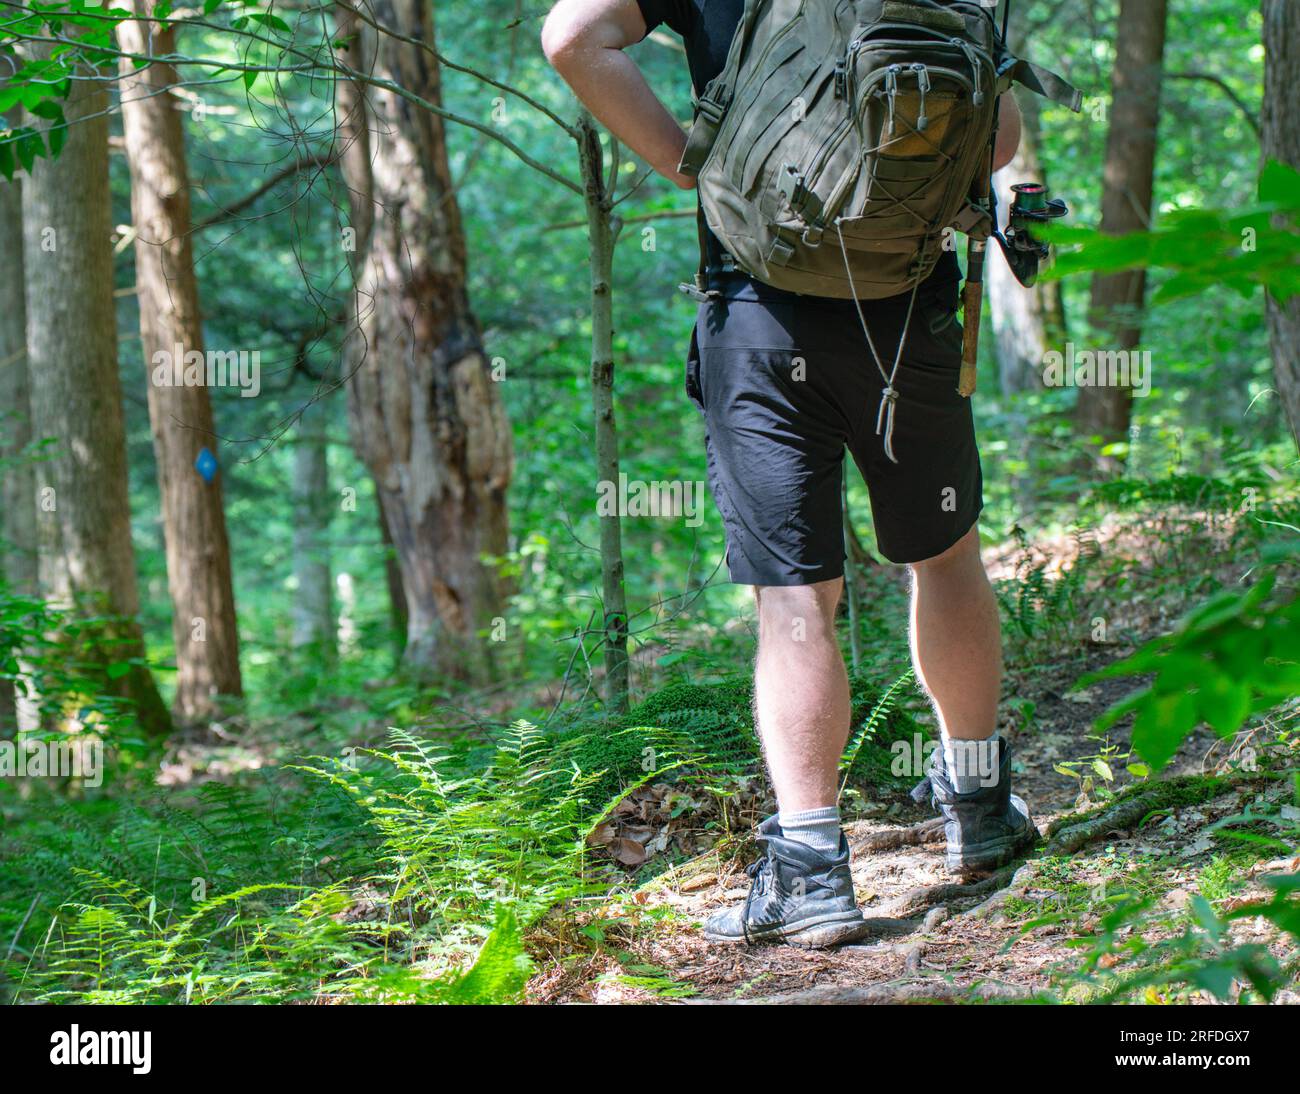 Hiker on a woodland trail, trail signs, natural background copy space image, active lifestyle Stock Photo